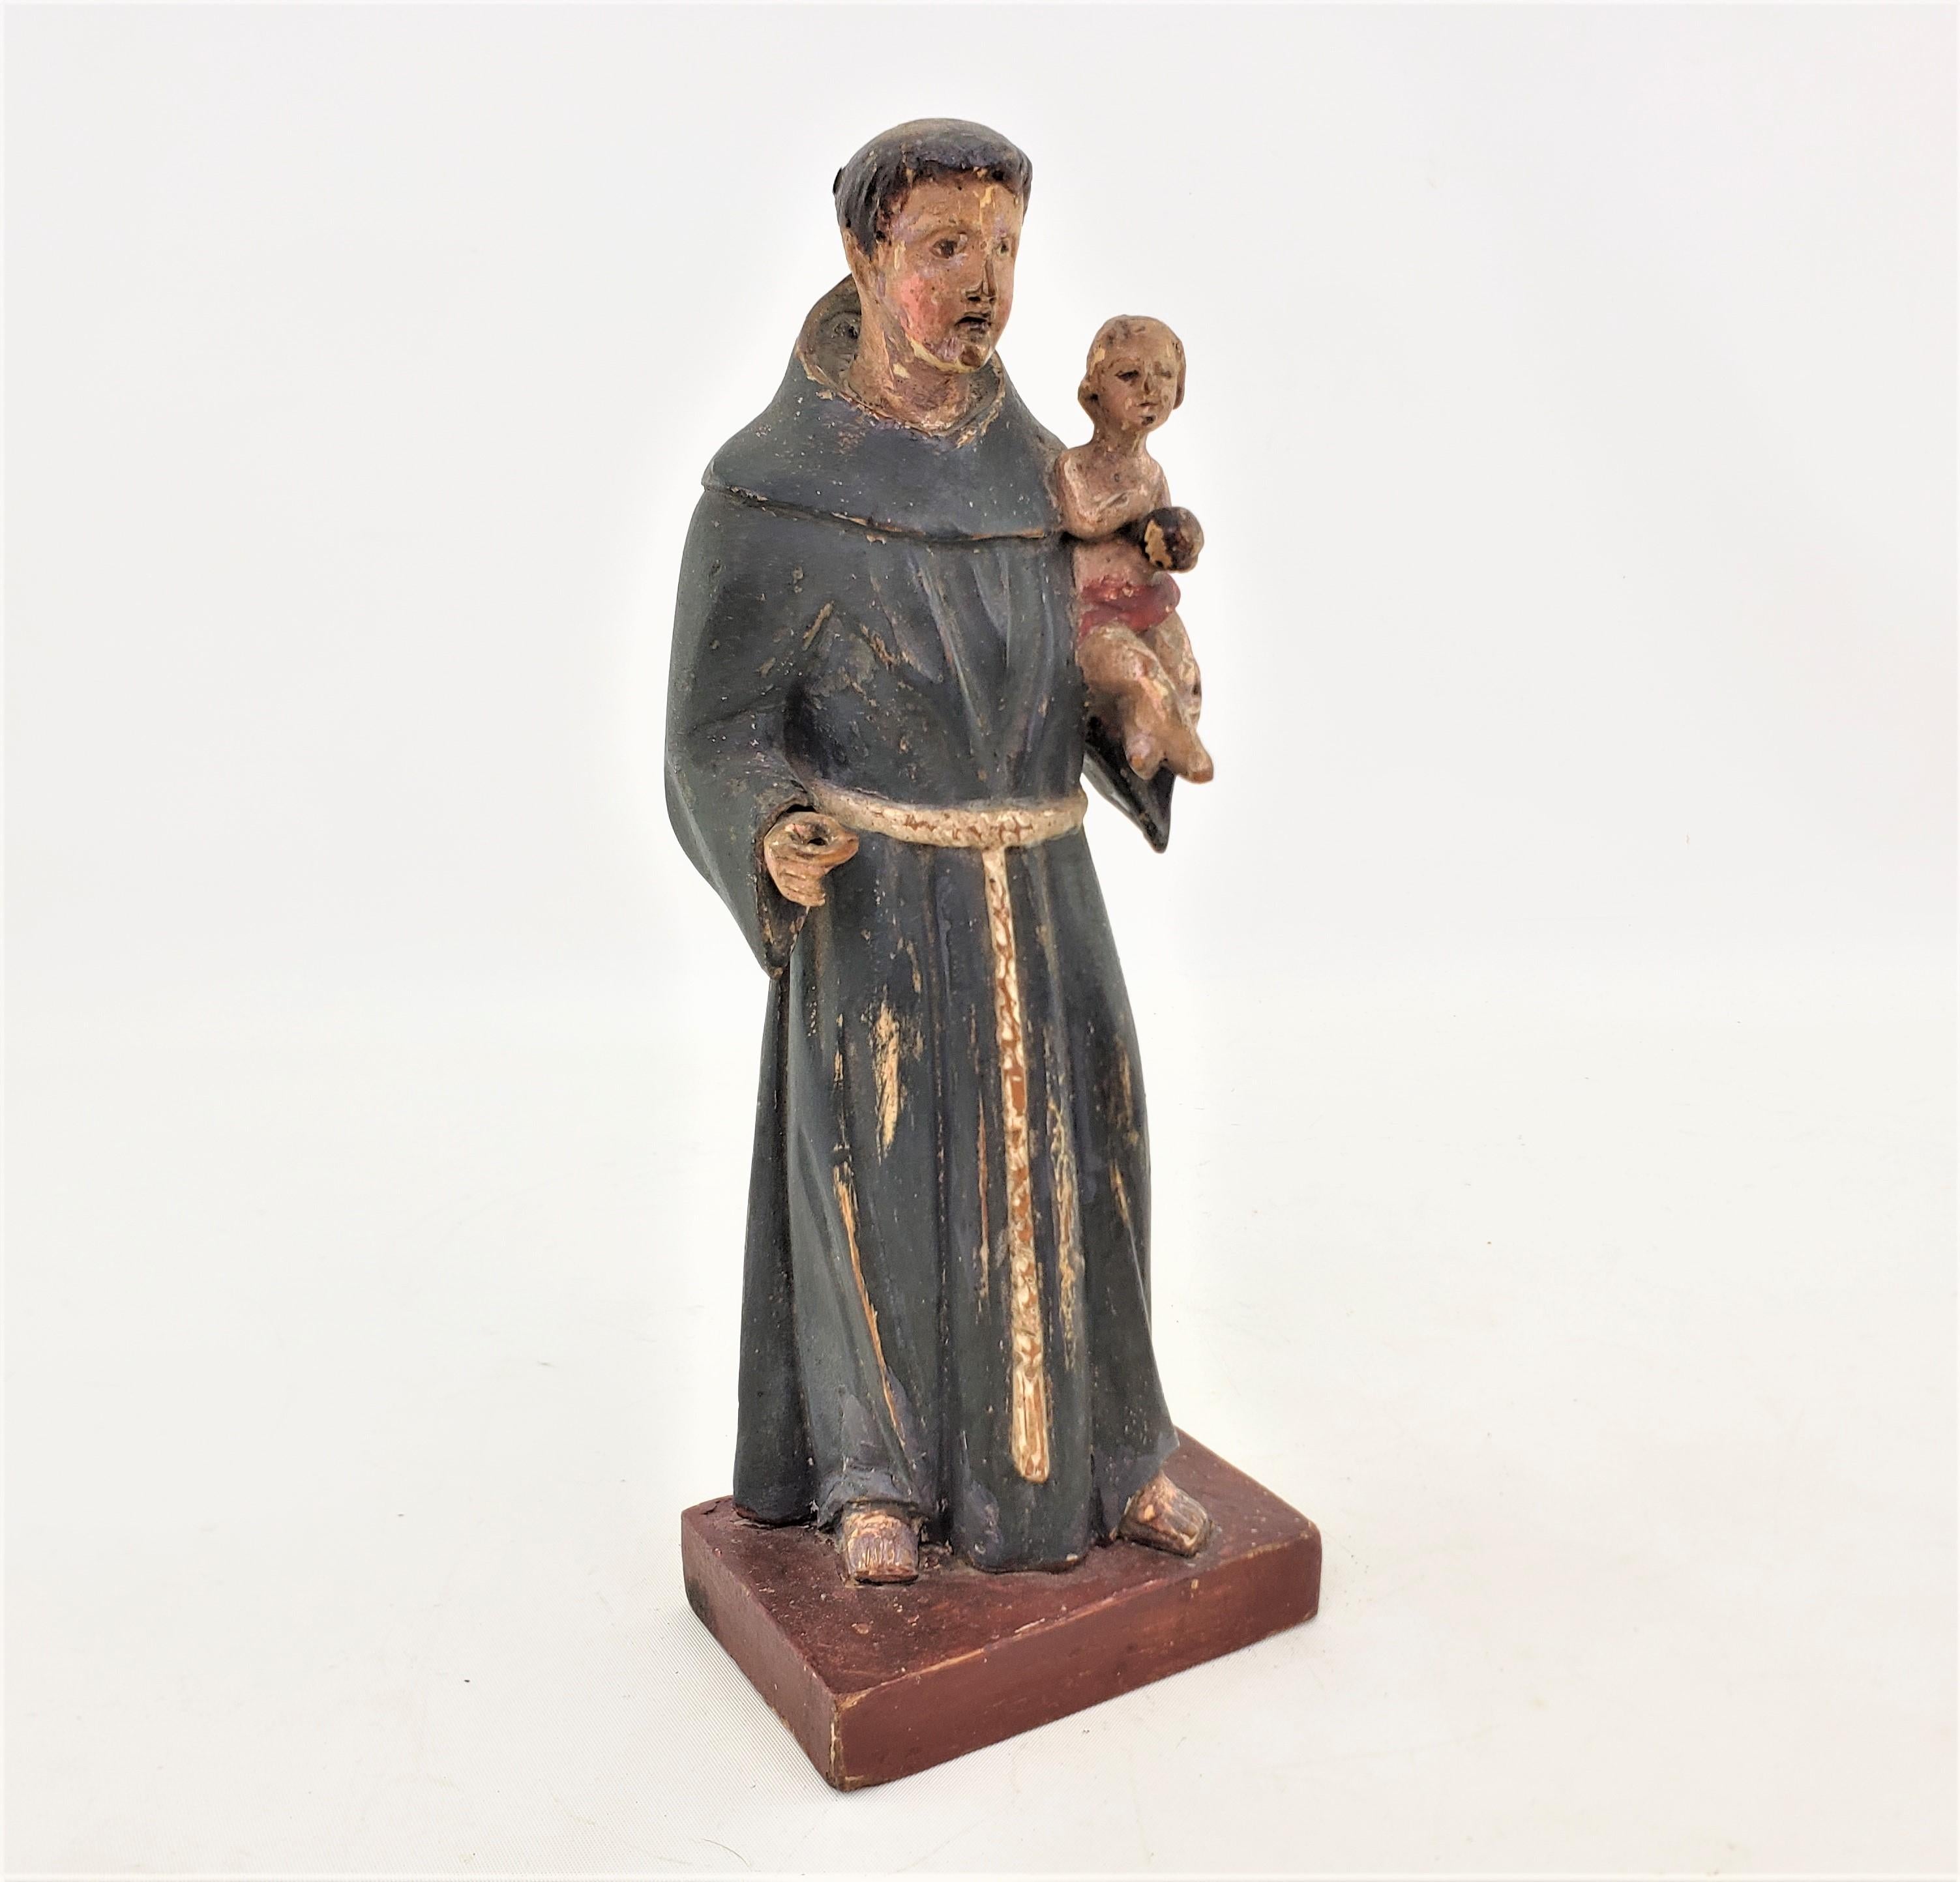 This hand-carved wooden sculpture is unsigned, but presumed to have originated from Quebic Canada and date to approximately 1950 and done in the period Folk Art style. The sculpture is composed of pine wood and carved to depict a robed male clergy